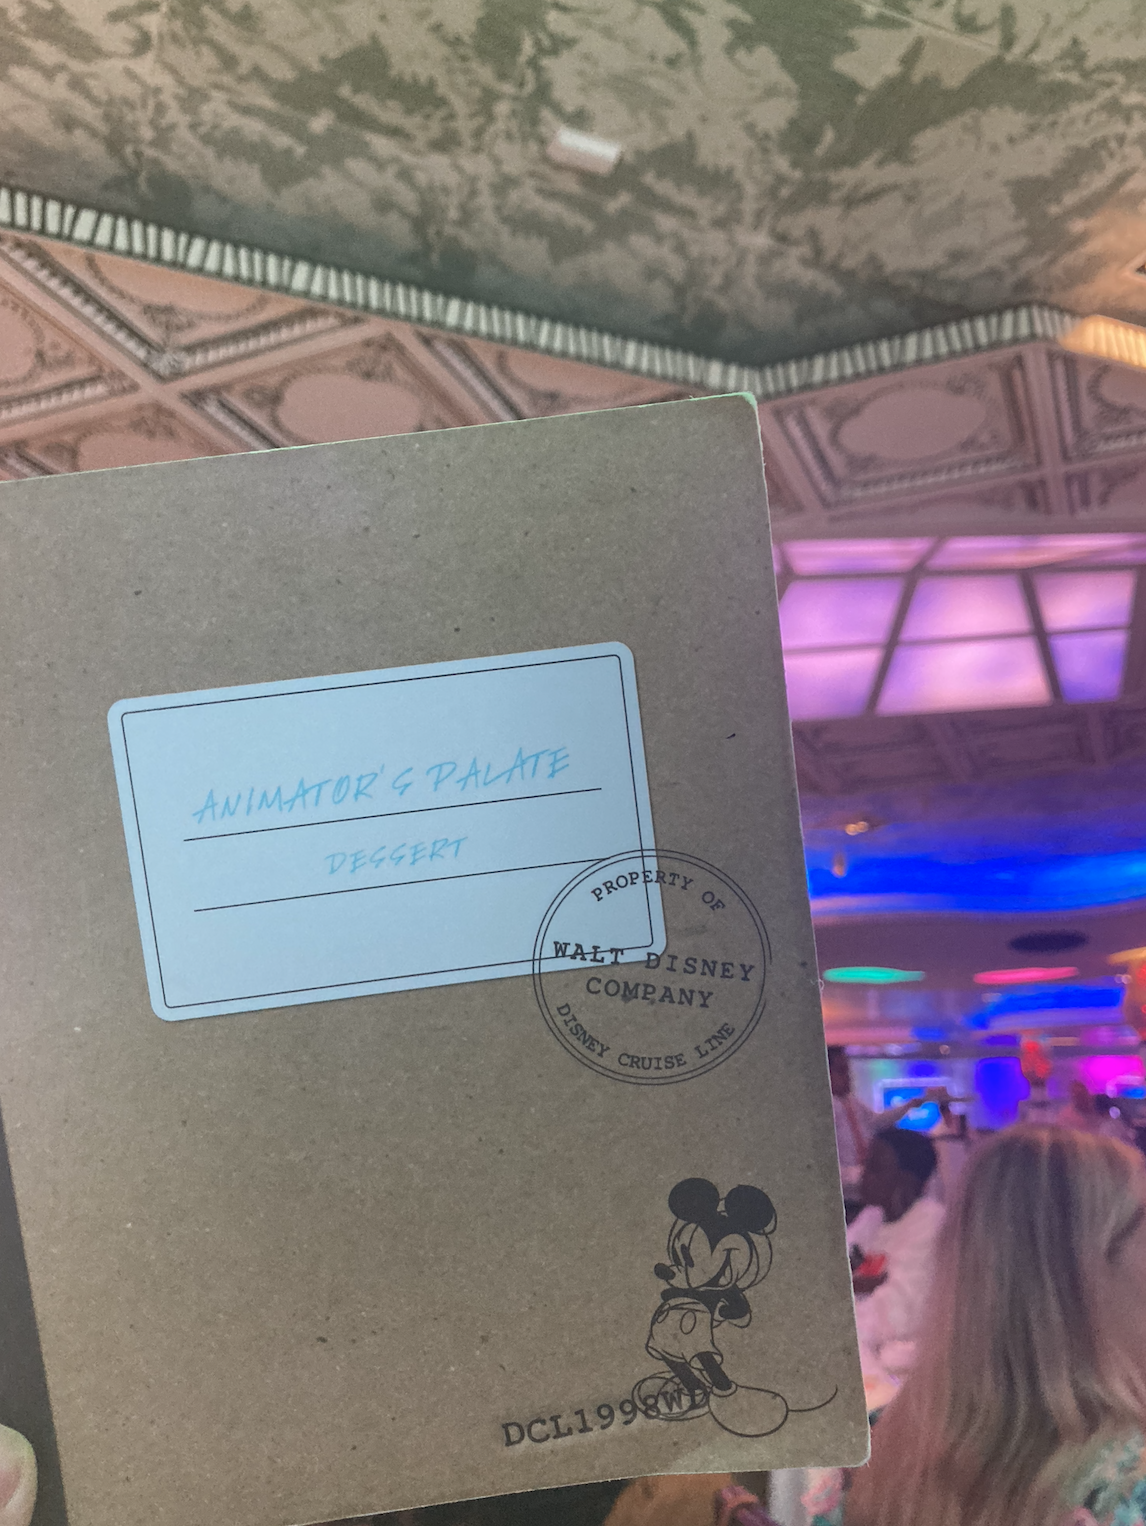 Menu for Animator&#x27;s Palate restaurant on Disney Cruise Line open to the dessert section showing the Disney trademark